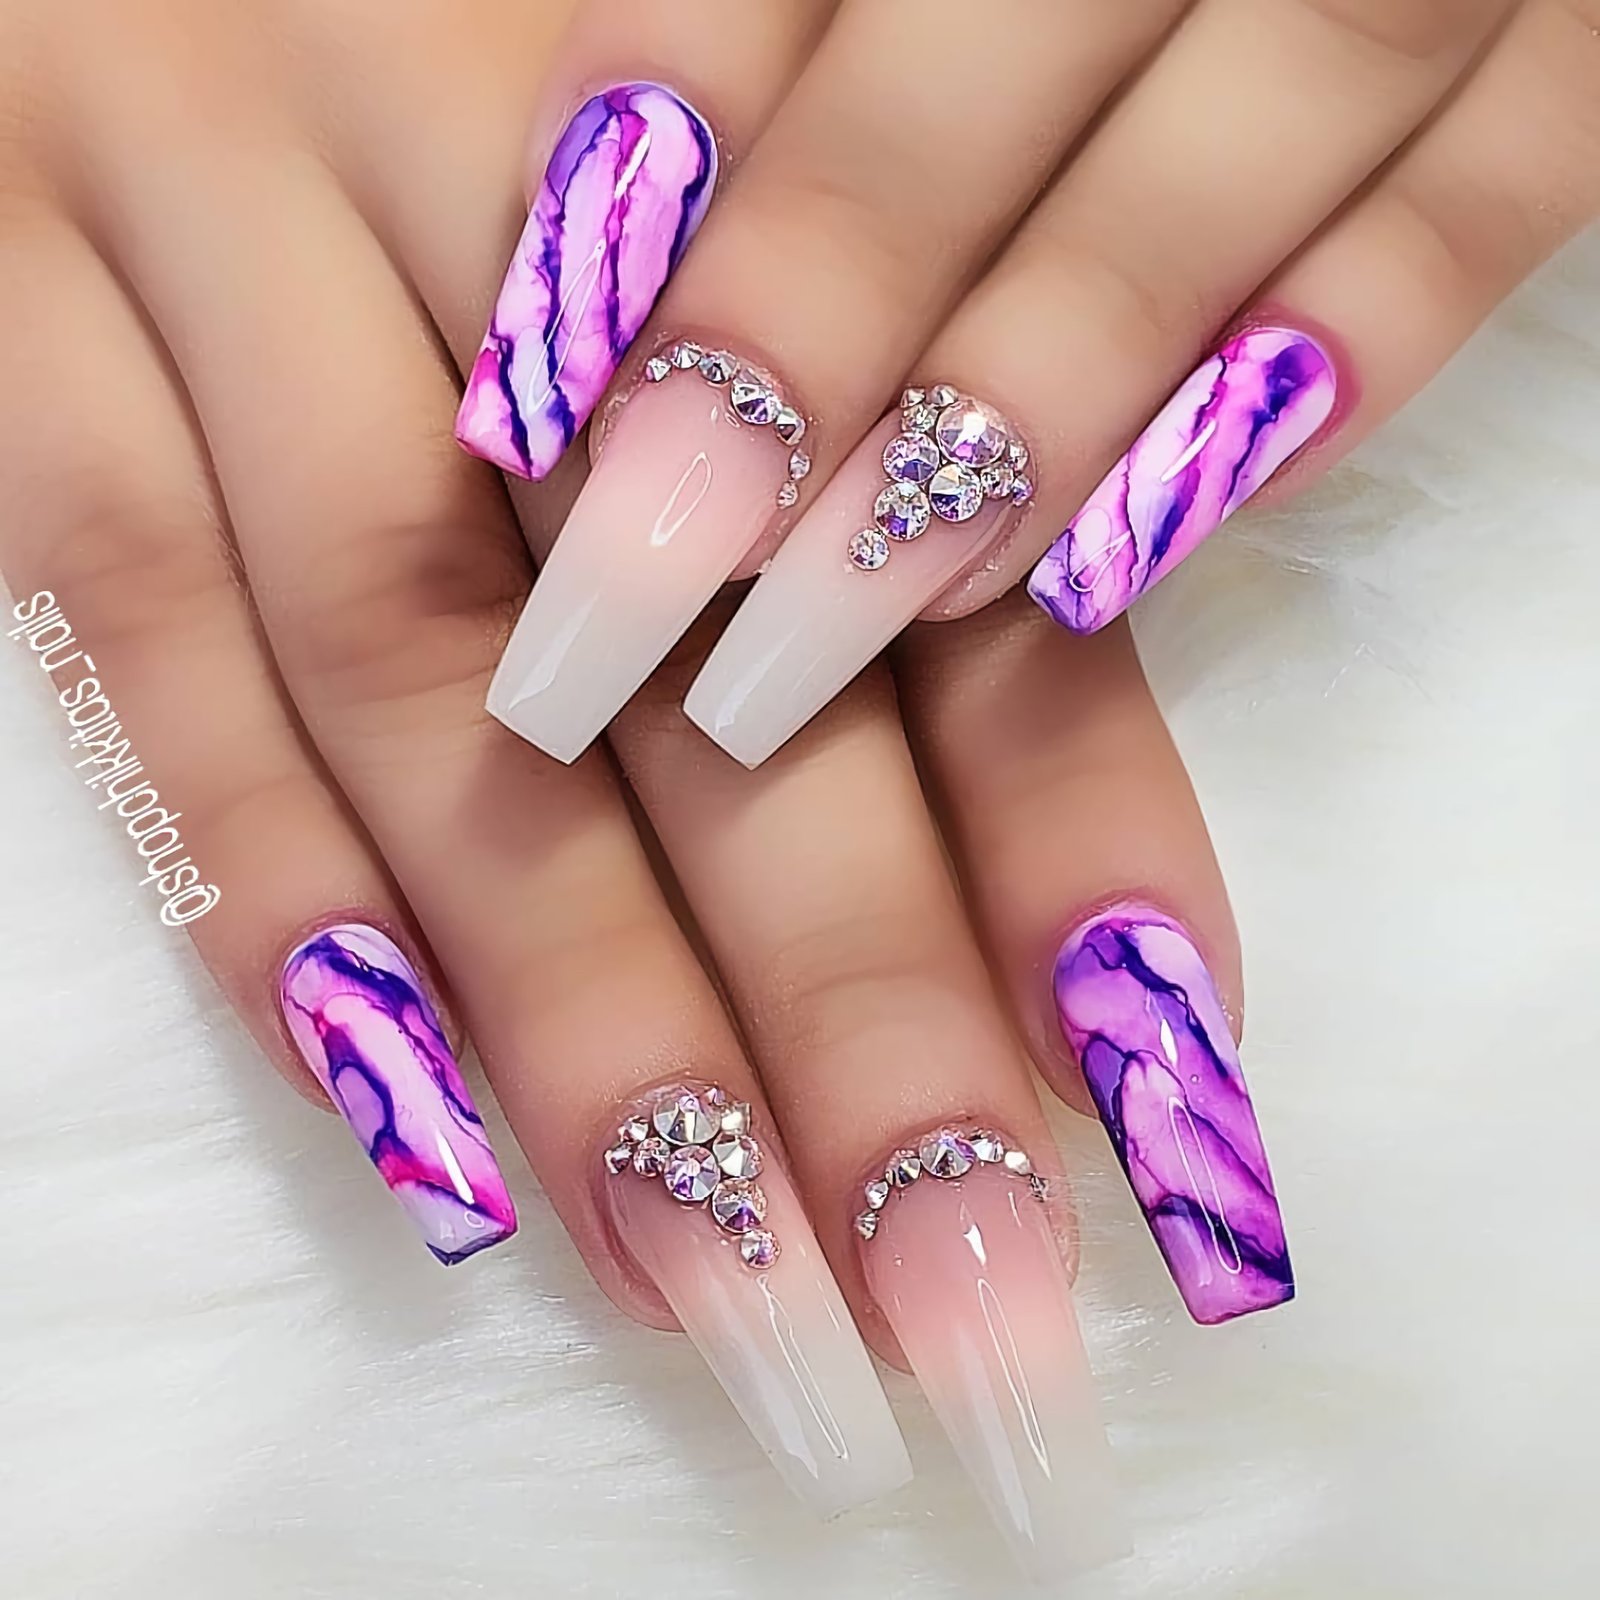 Pink and purple gemstone nails